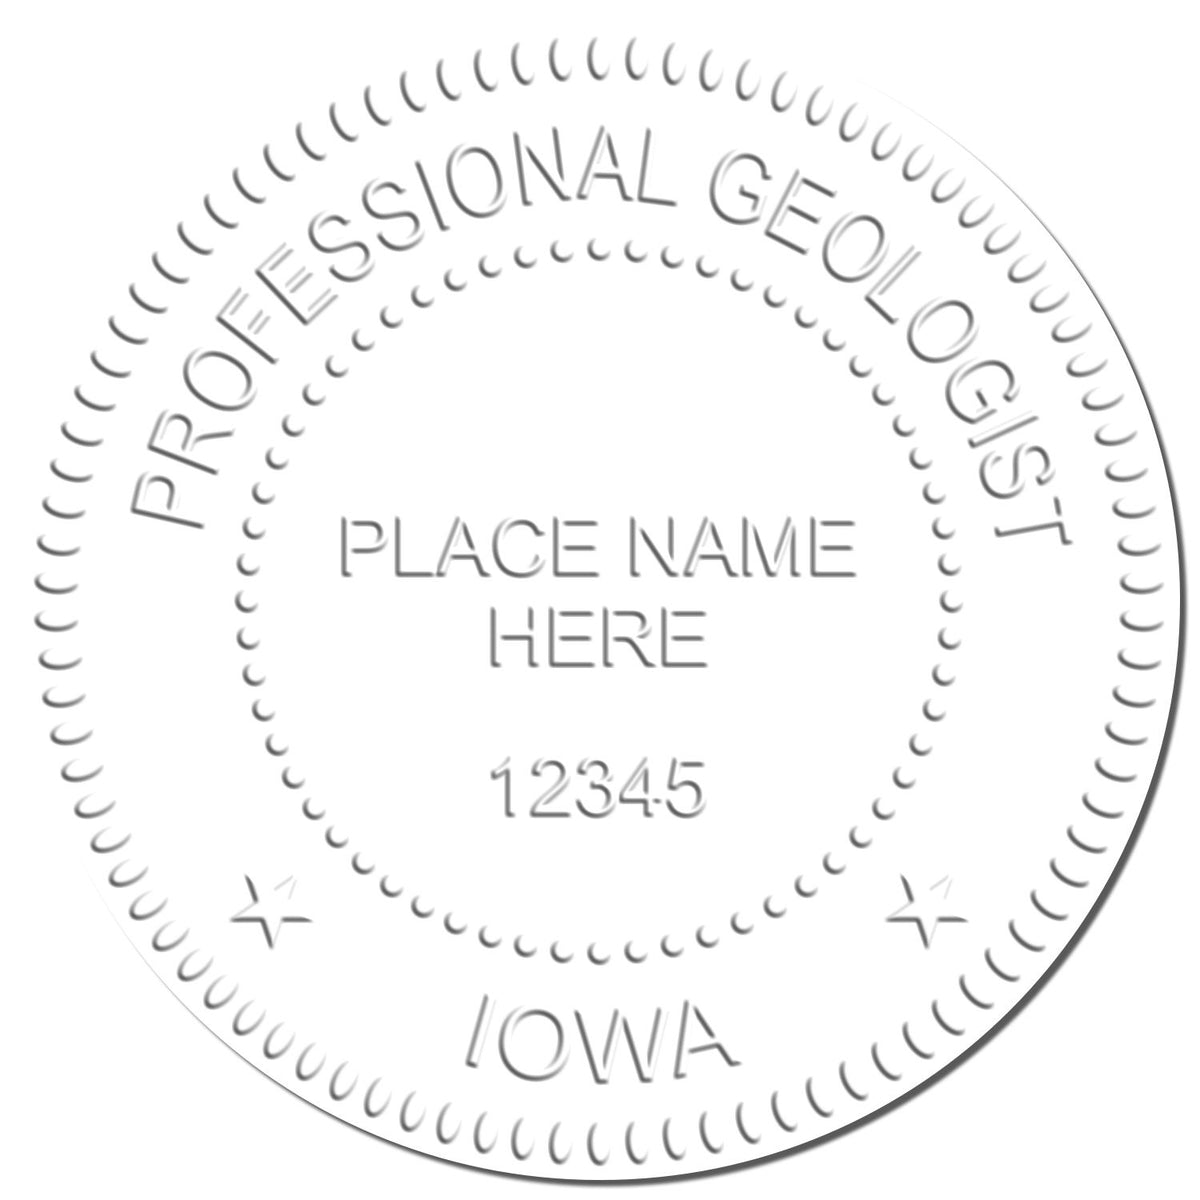 This paper is stamped with a sample imprint of the Handheld Iowa Professional Geologist Embosser, signifying its quality and reliability.